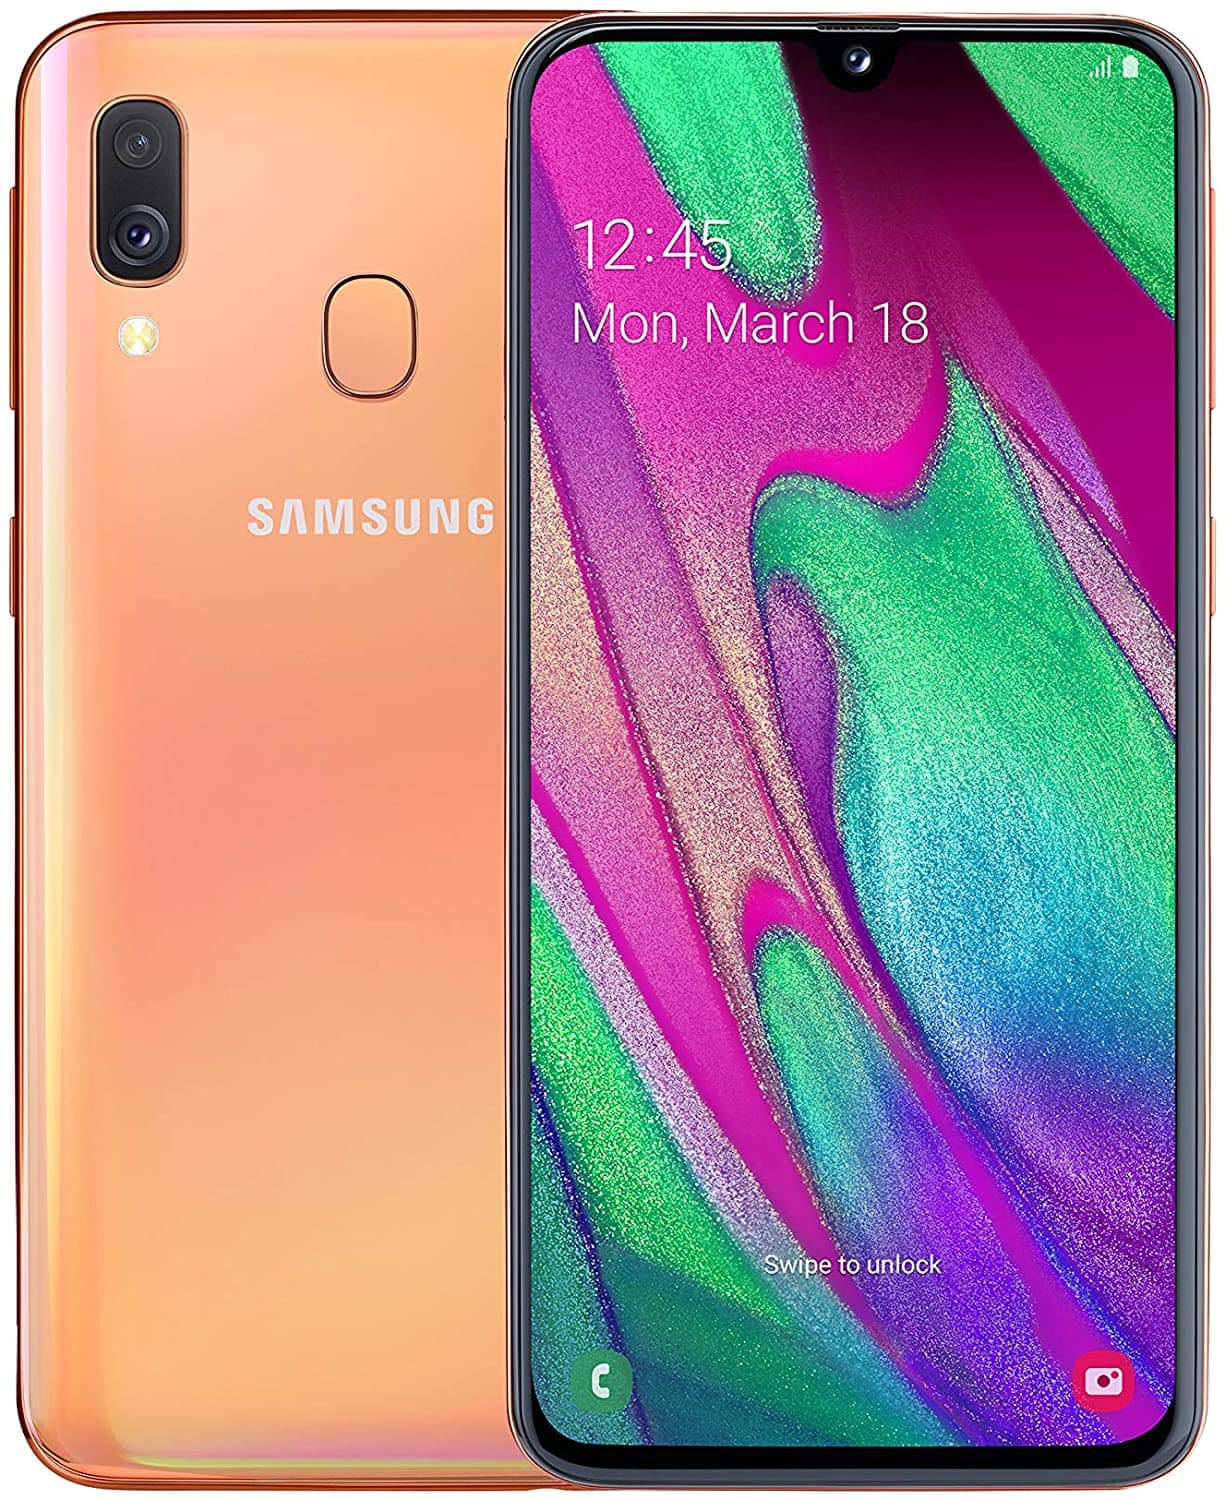 Samsung Galaxy A40 Receives One UI 2.0 Based On Android 10 in UK